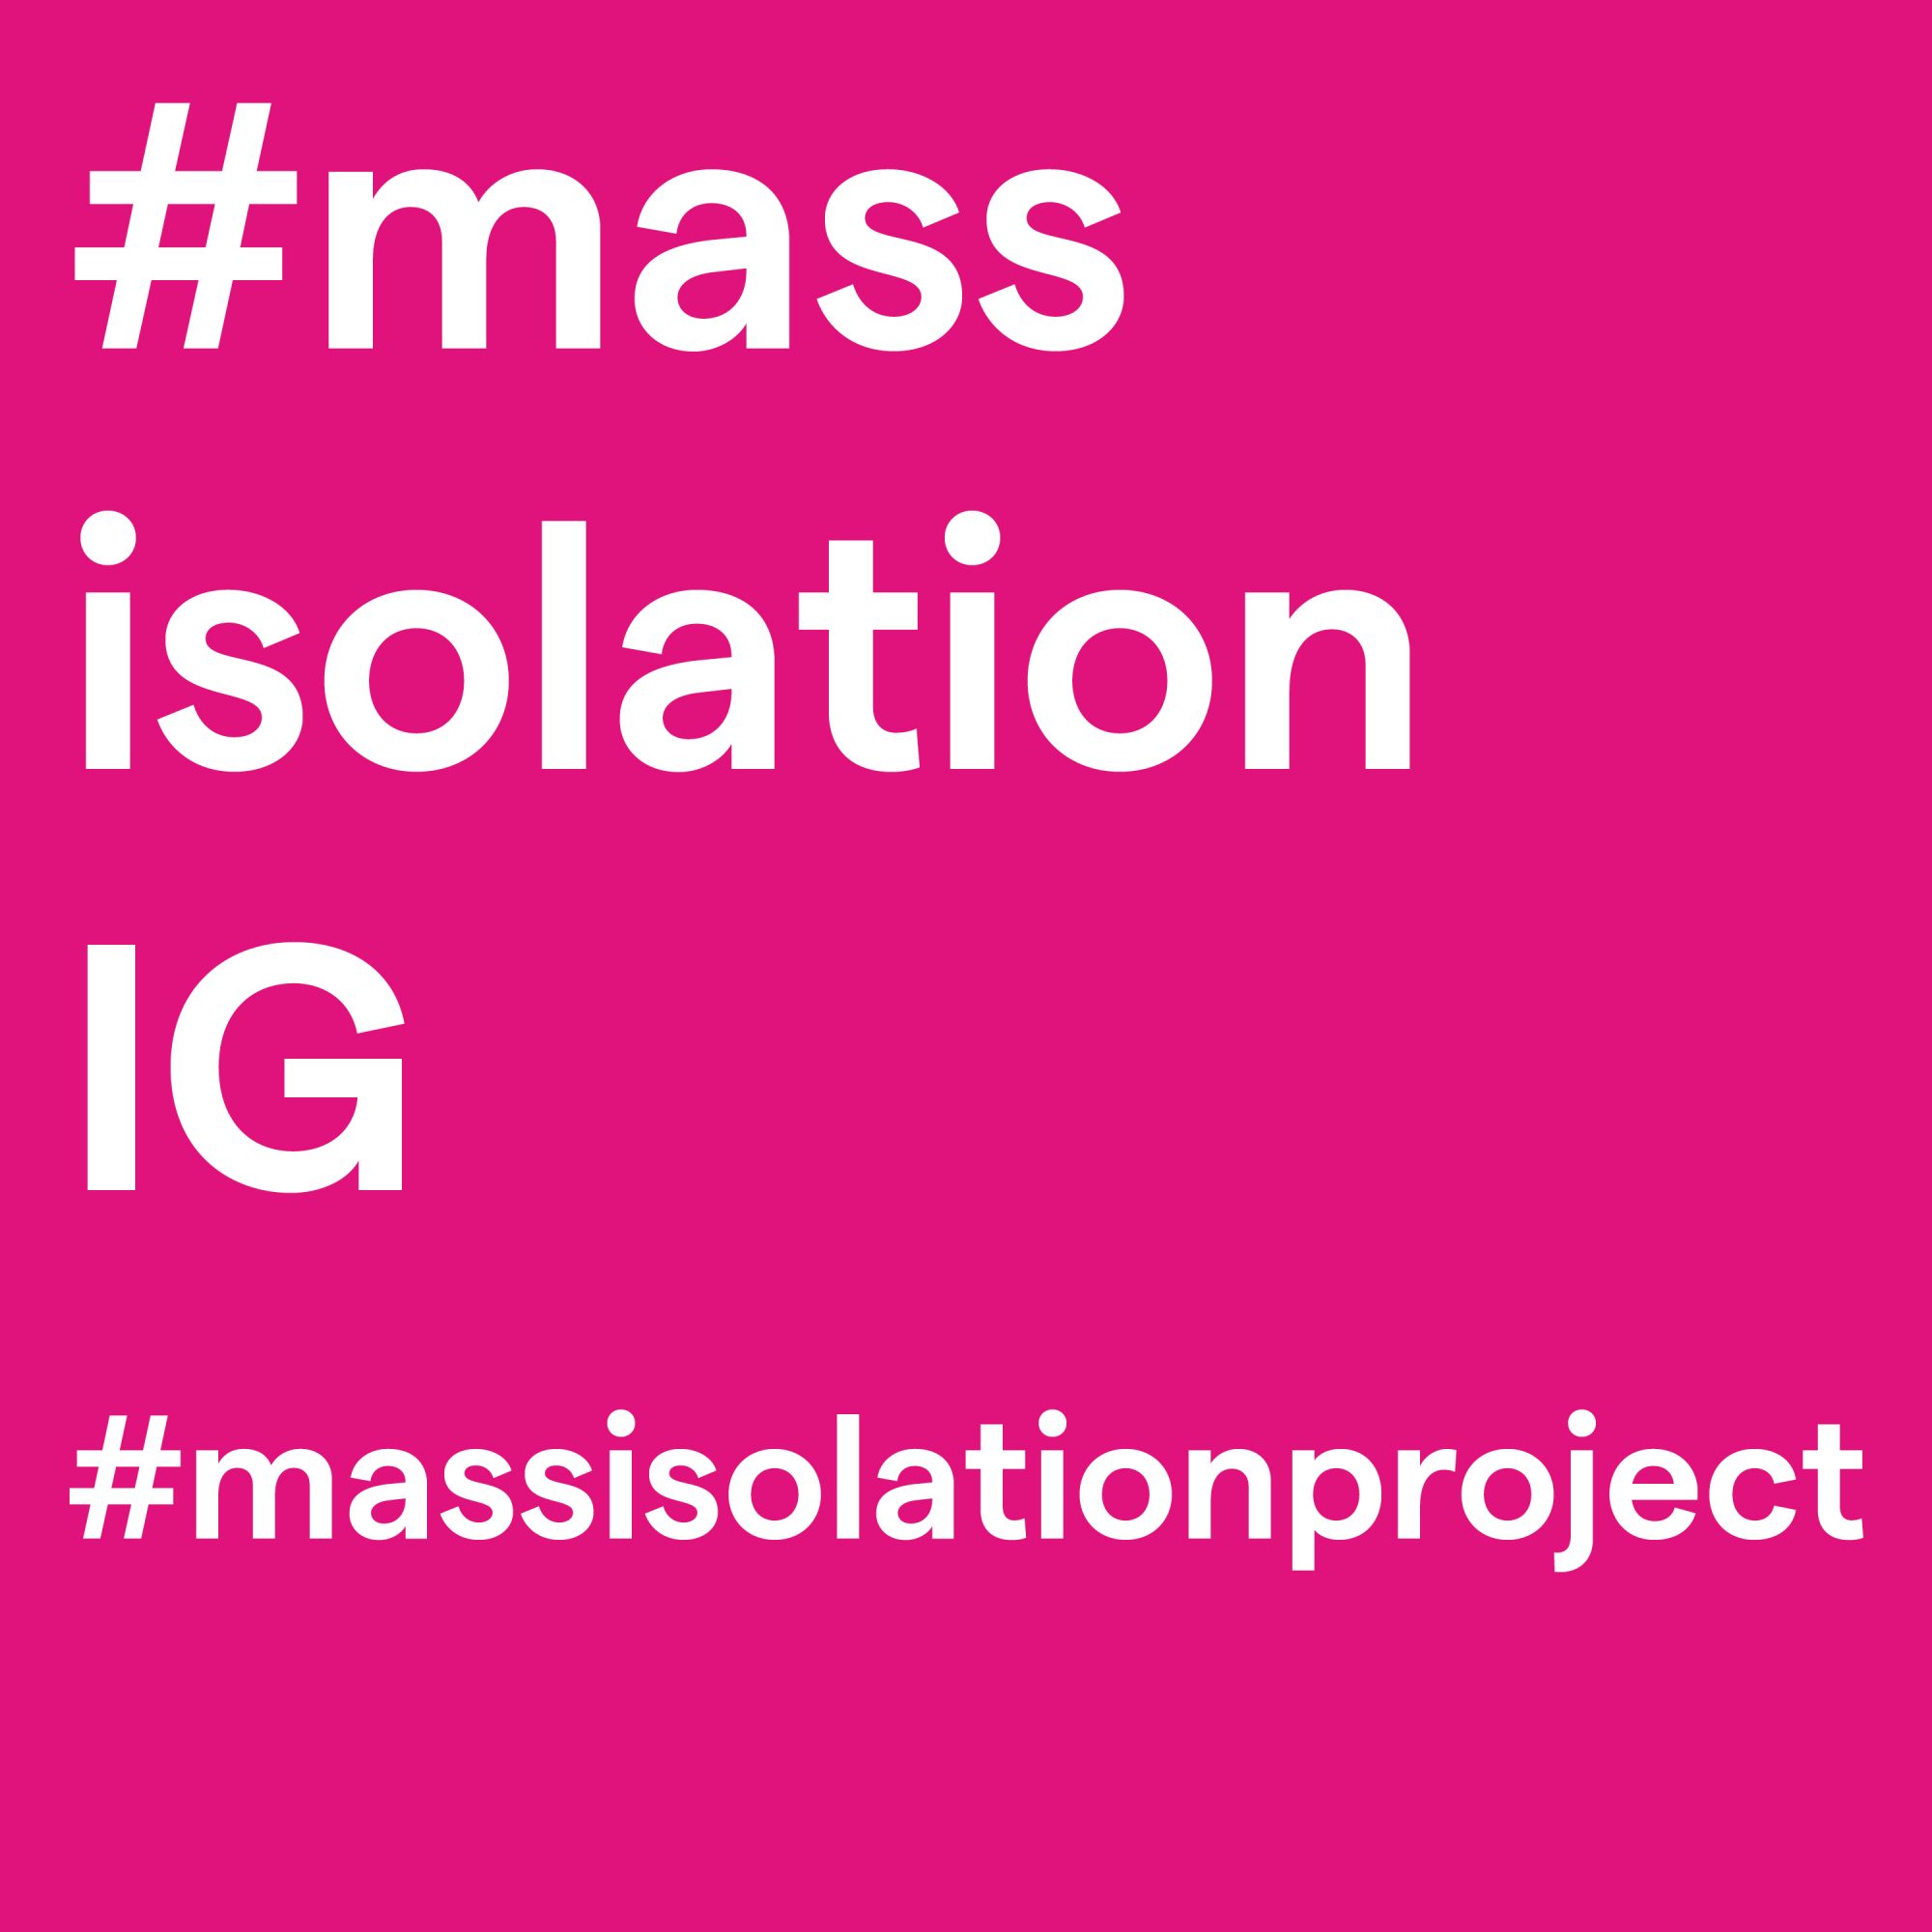 Project for Instagram called Mass Isolation Project